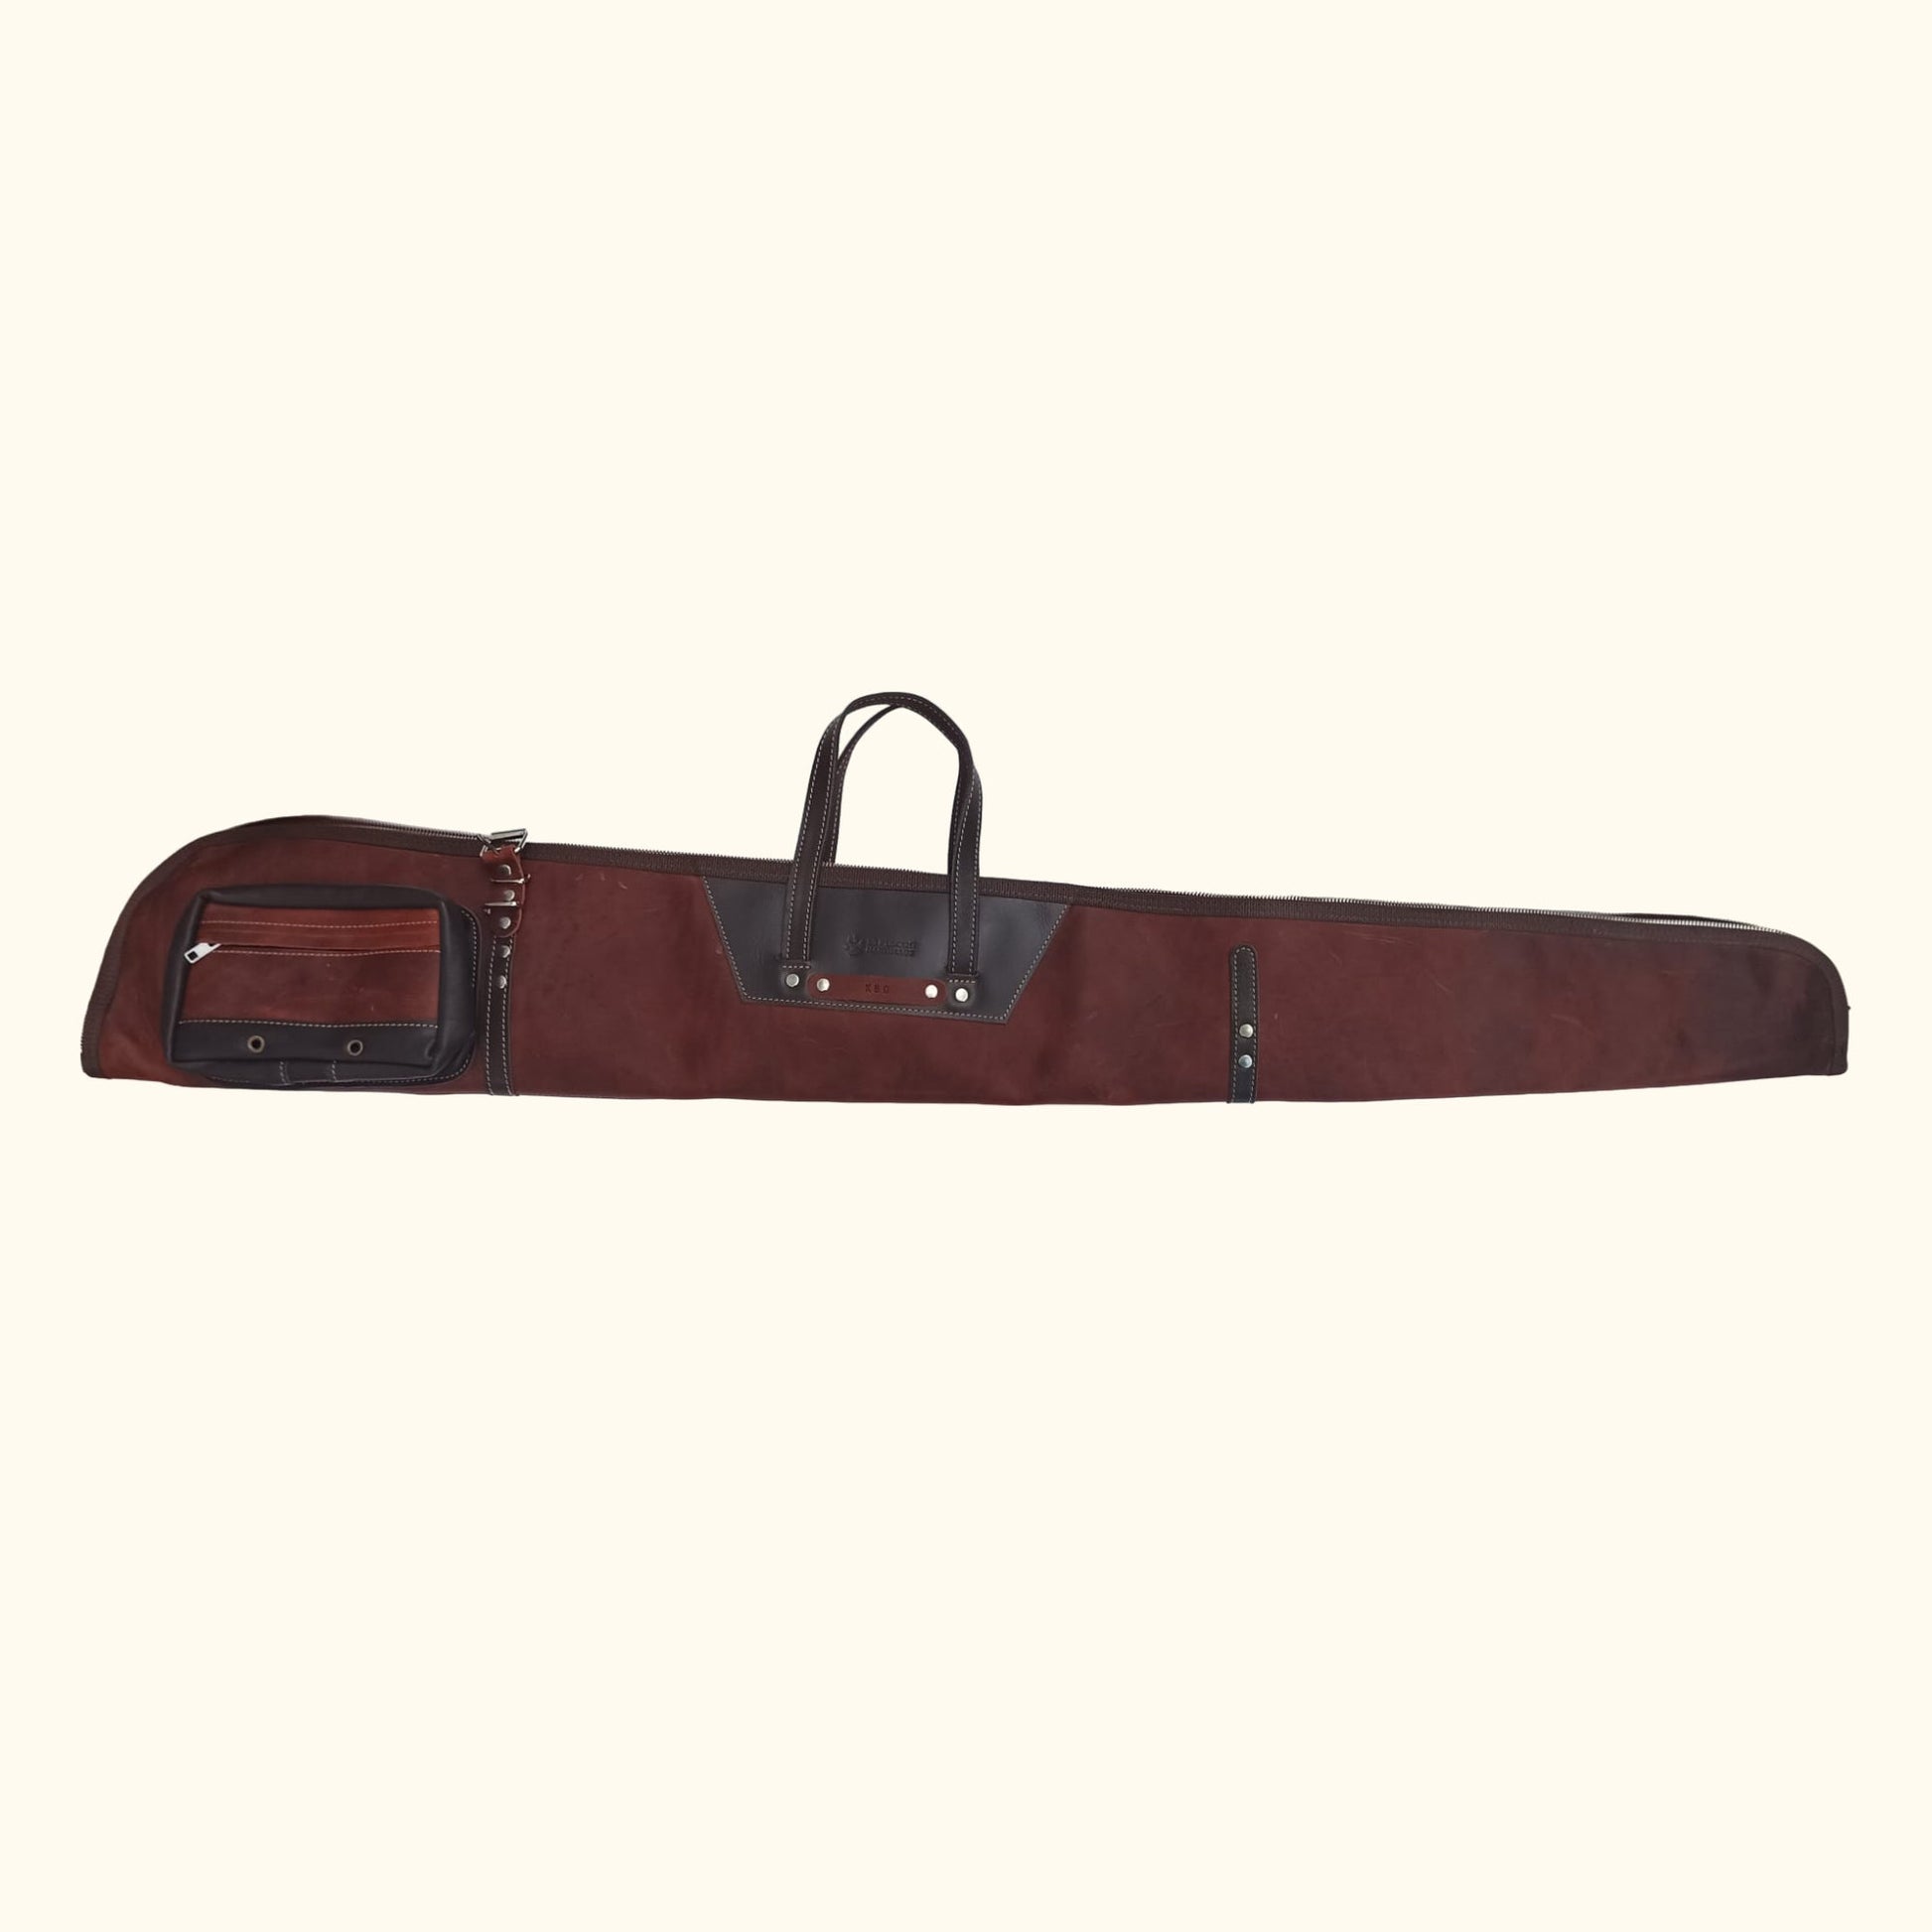 40 inch to 60 inch | Shotgun Cases | Rifle Cases | Leather | Canvas | Shotgun Case | Shotgun Bag | Hunting | Shotgun | Gun case | Personalization  99percenthandmade   